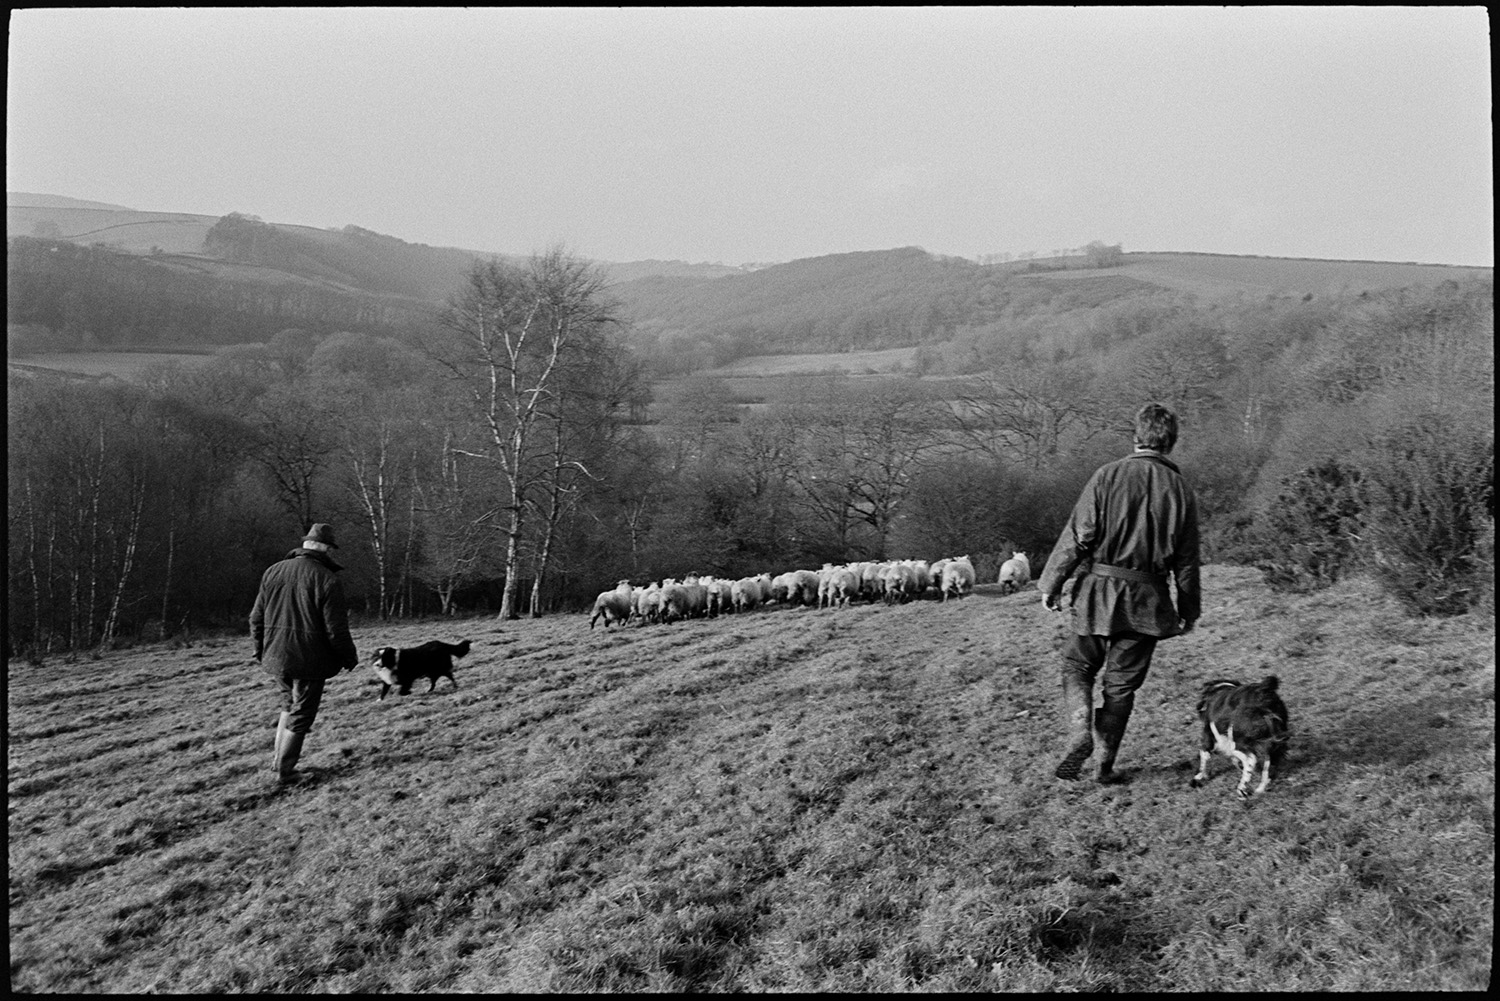 Farmer taking flock of sheep down lane to pasture, dogs. 
[Alan Berry, on the left, and another man herding sheep through a field at Ashwell, Dolton with two dogs. They are taking them to new pasture. Fields and trees can be seen in the background.]